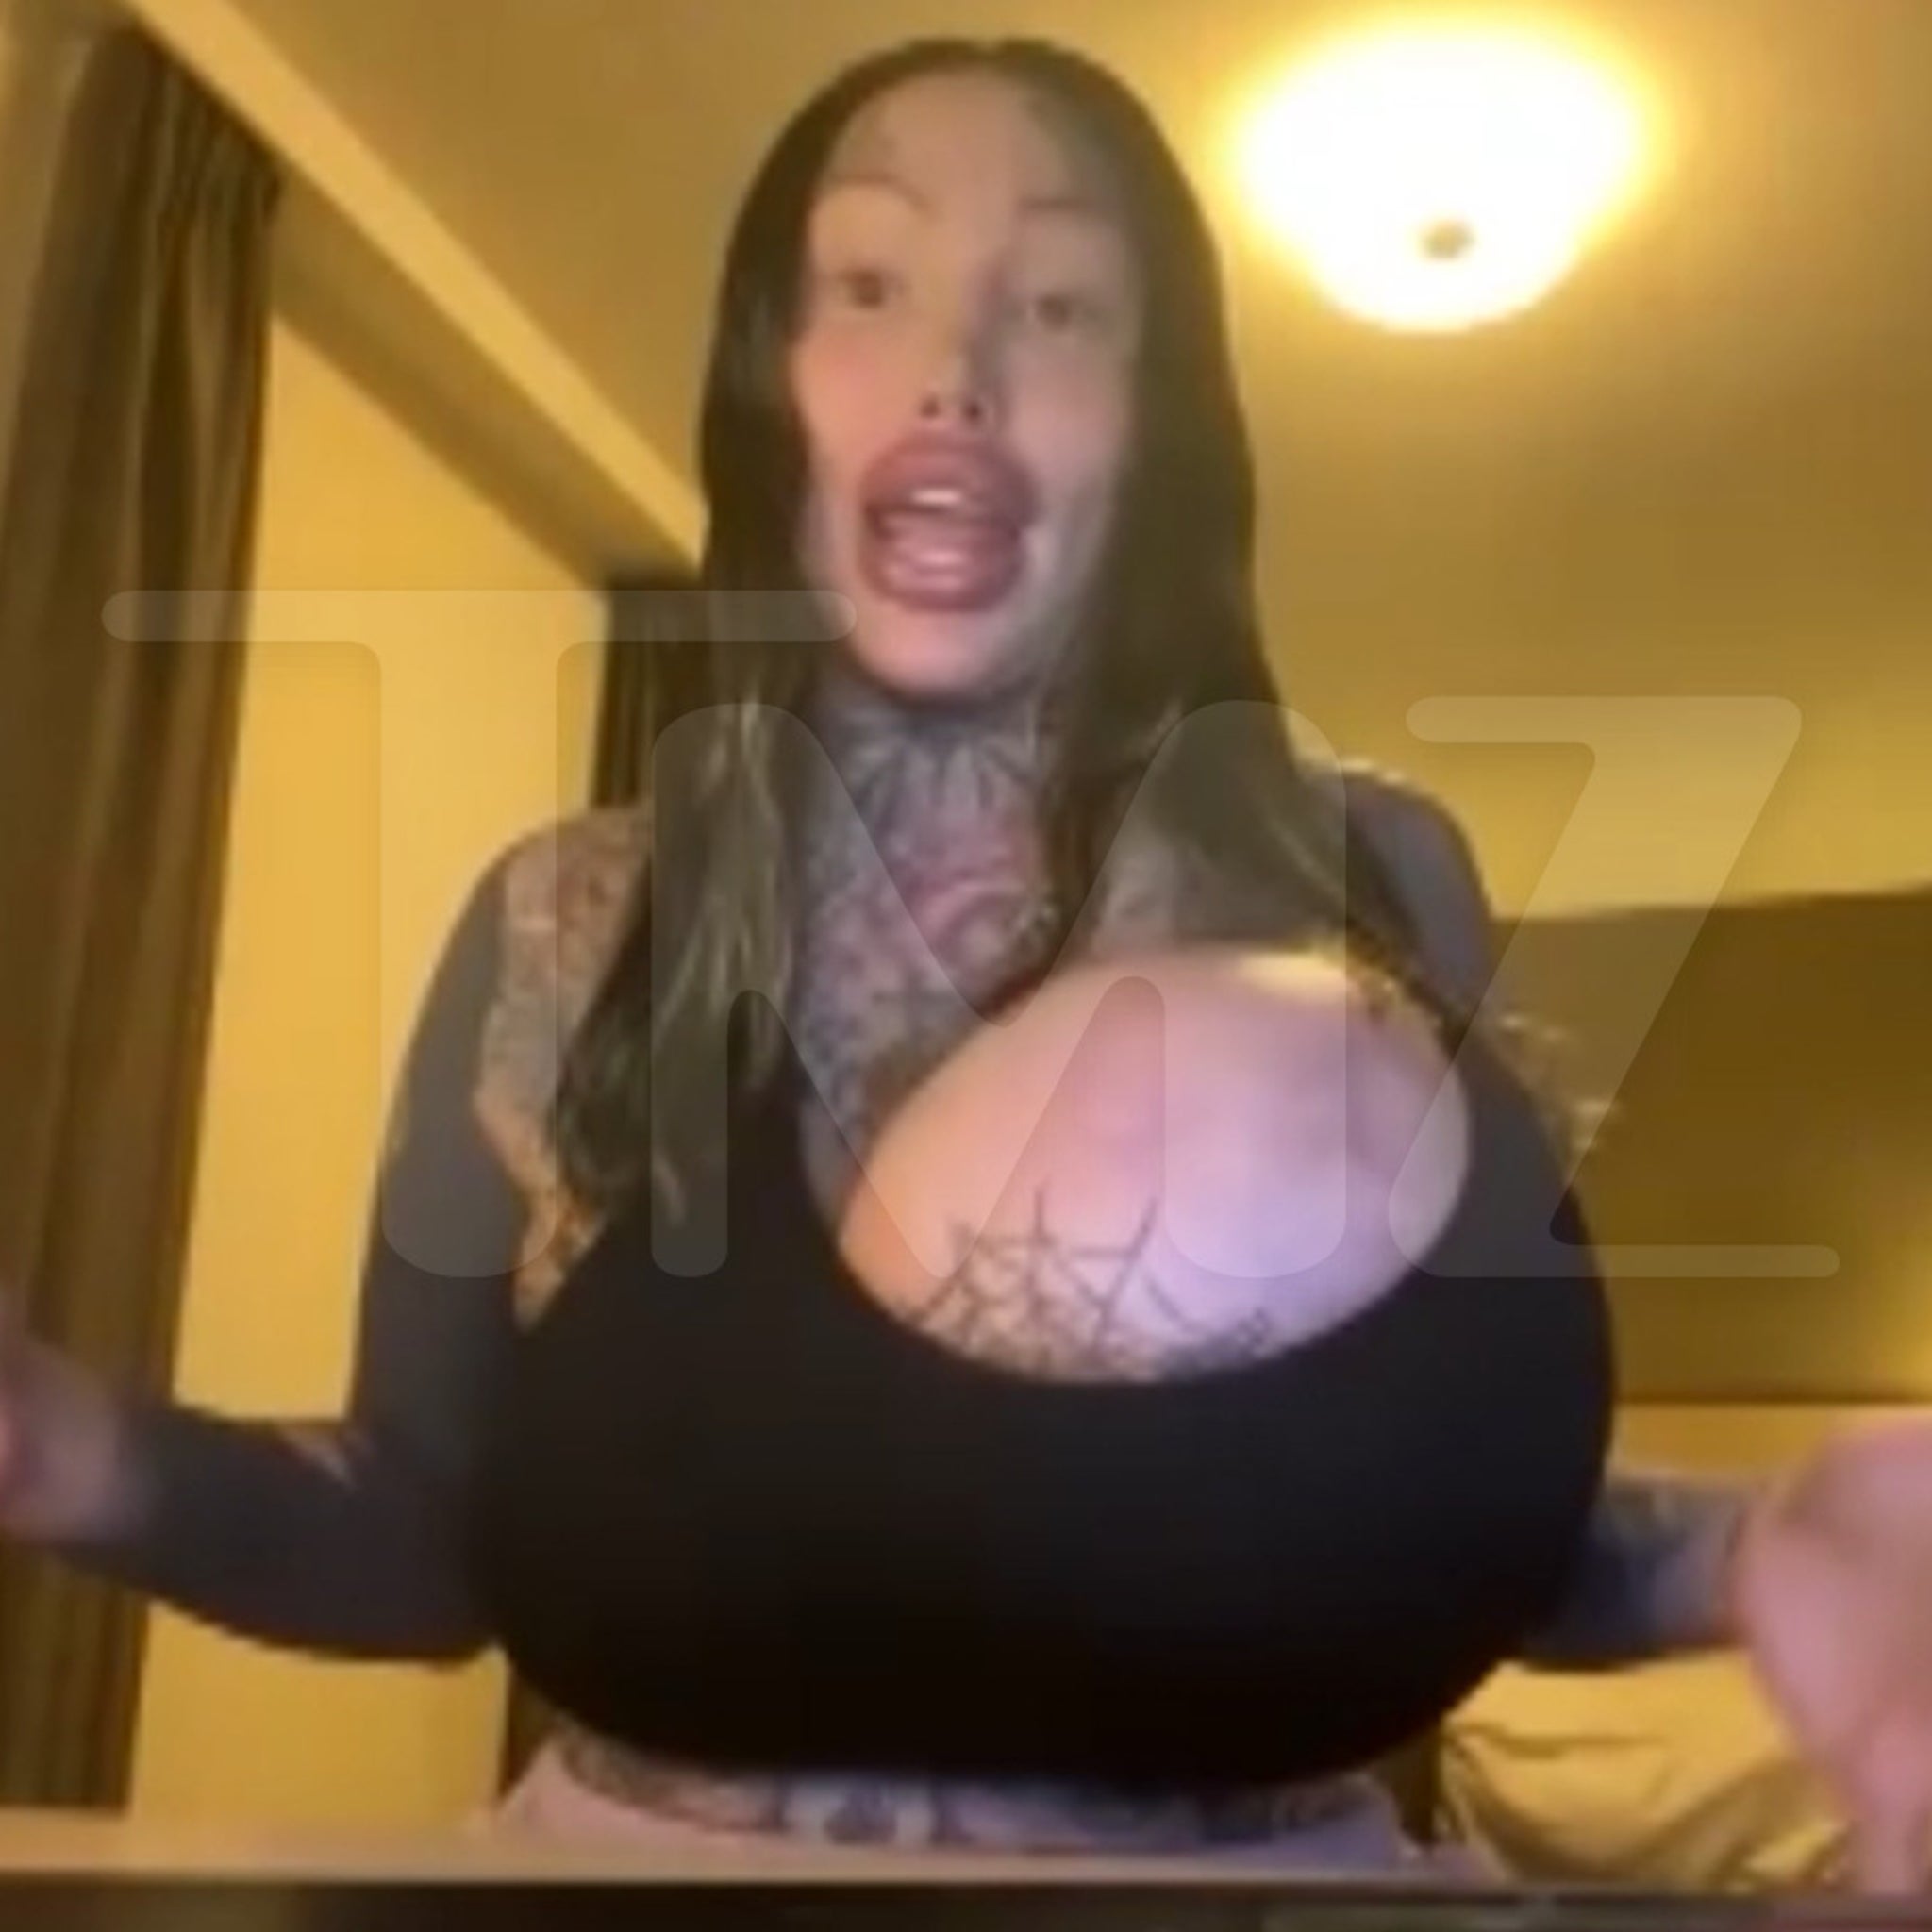 Uni-Boob IG Model Says She's Not Mentally Ill, Surgery Is Her